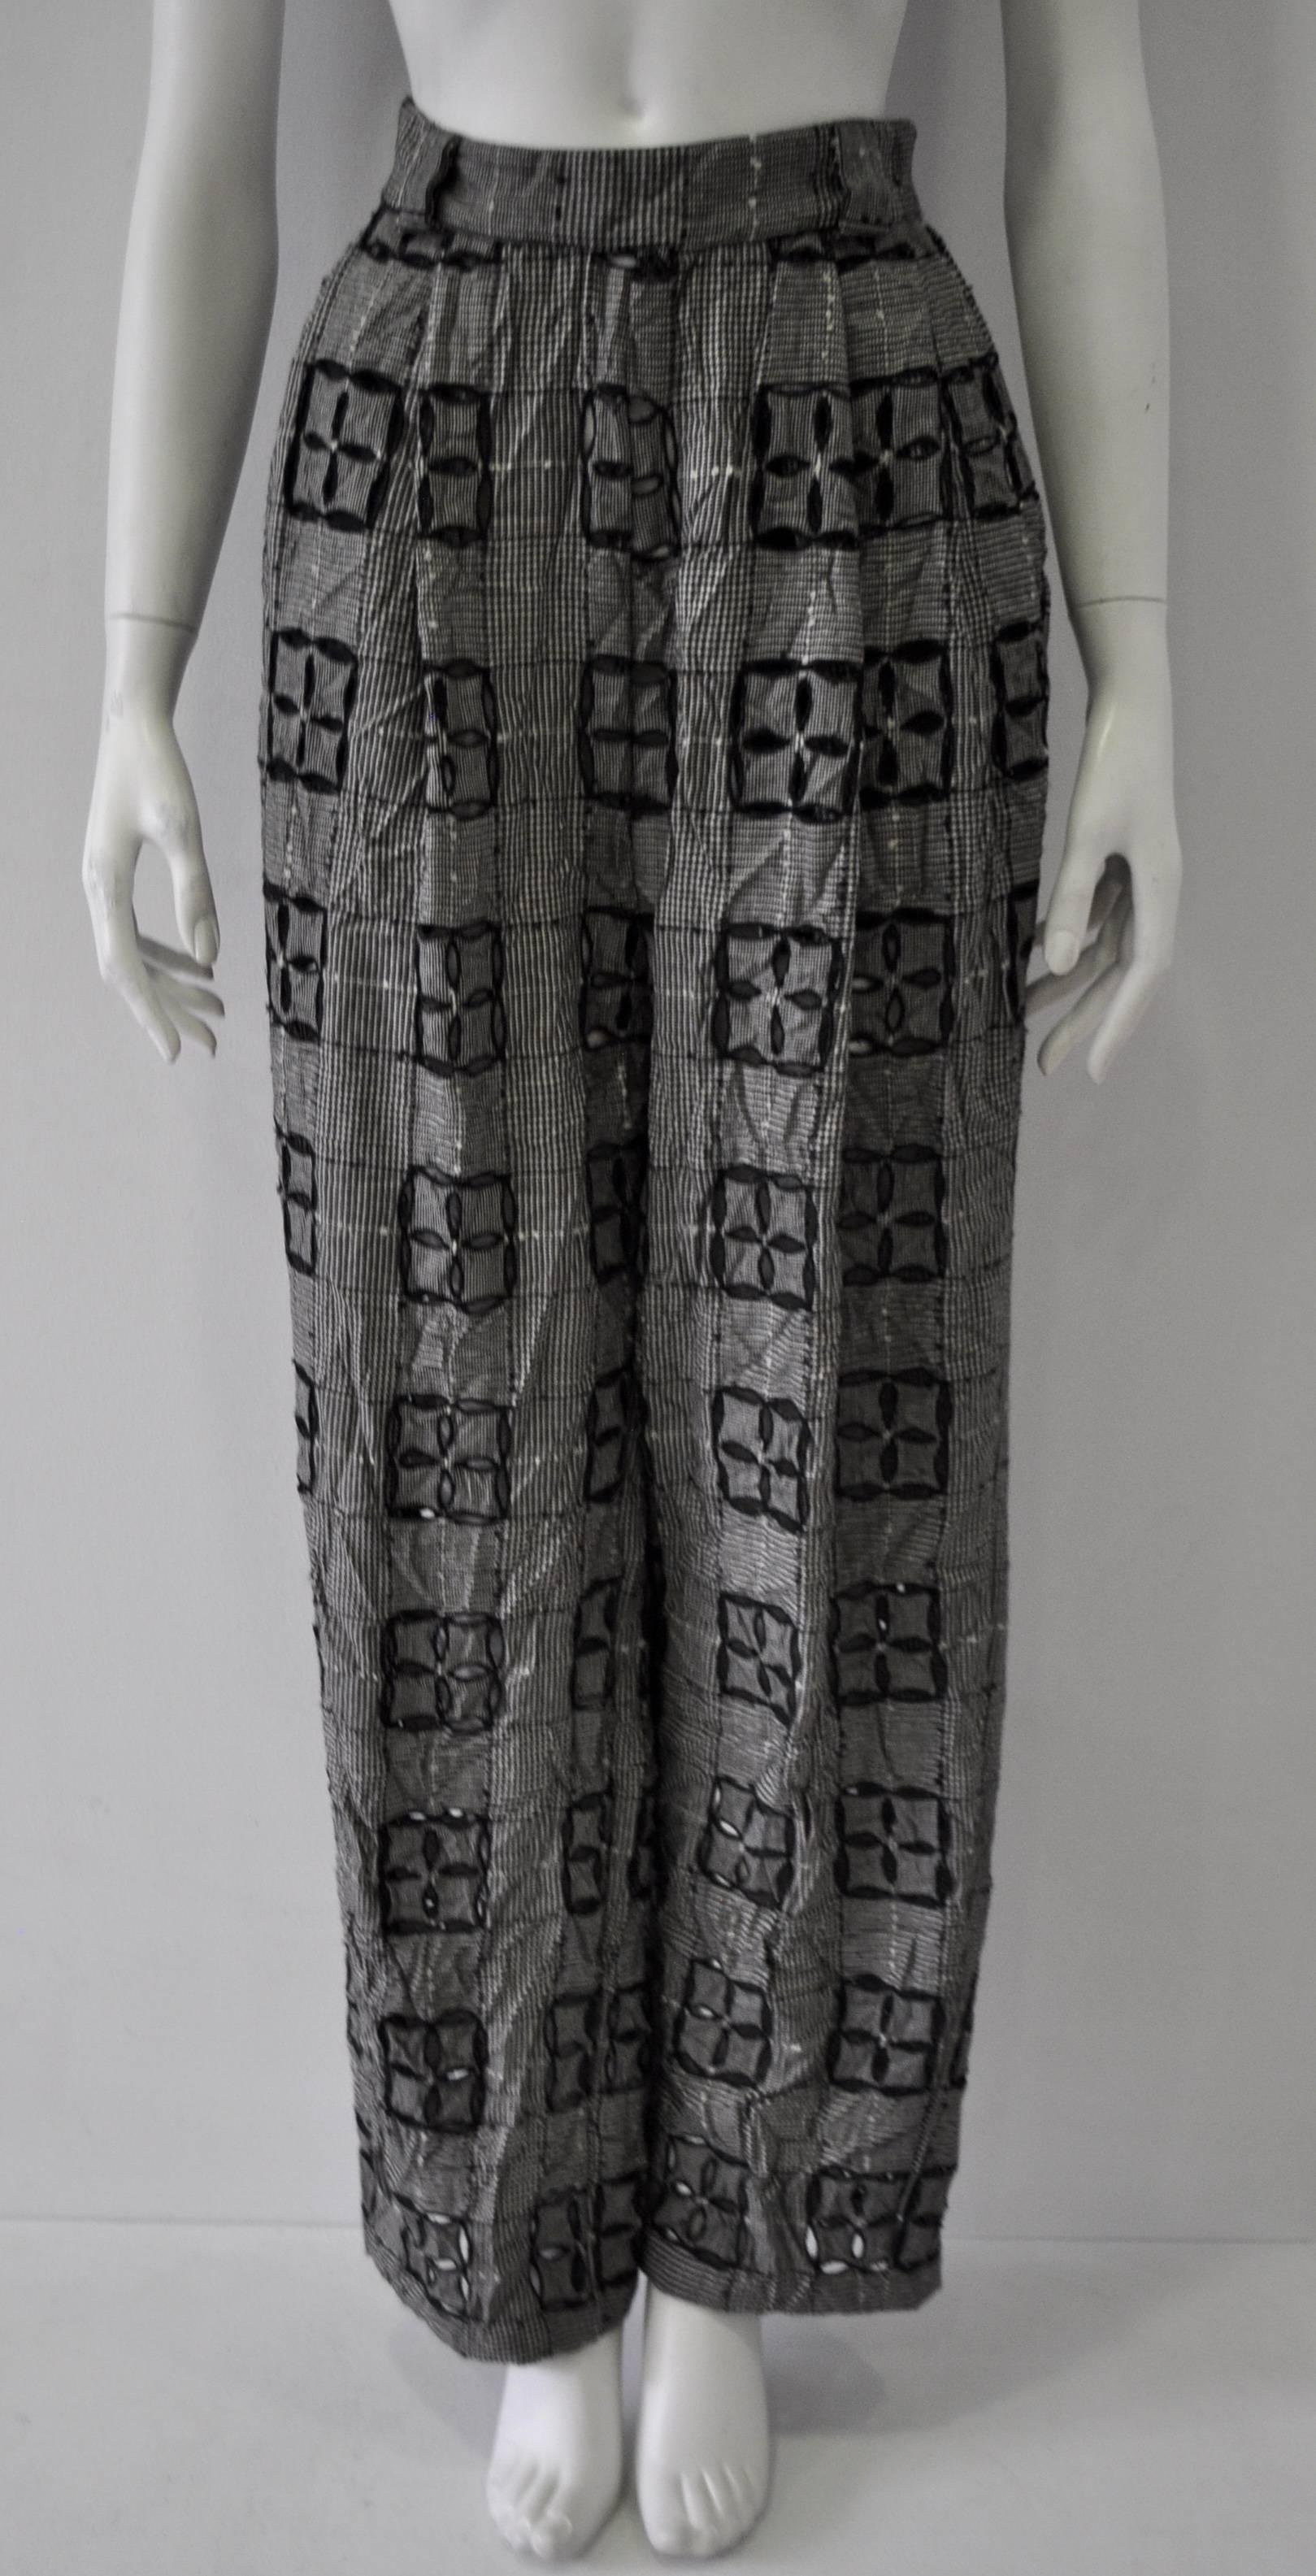 Extremely Original Atelier Versace Black and White Perforated Checked Pants